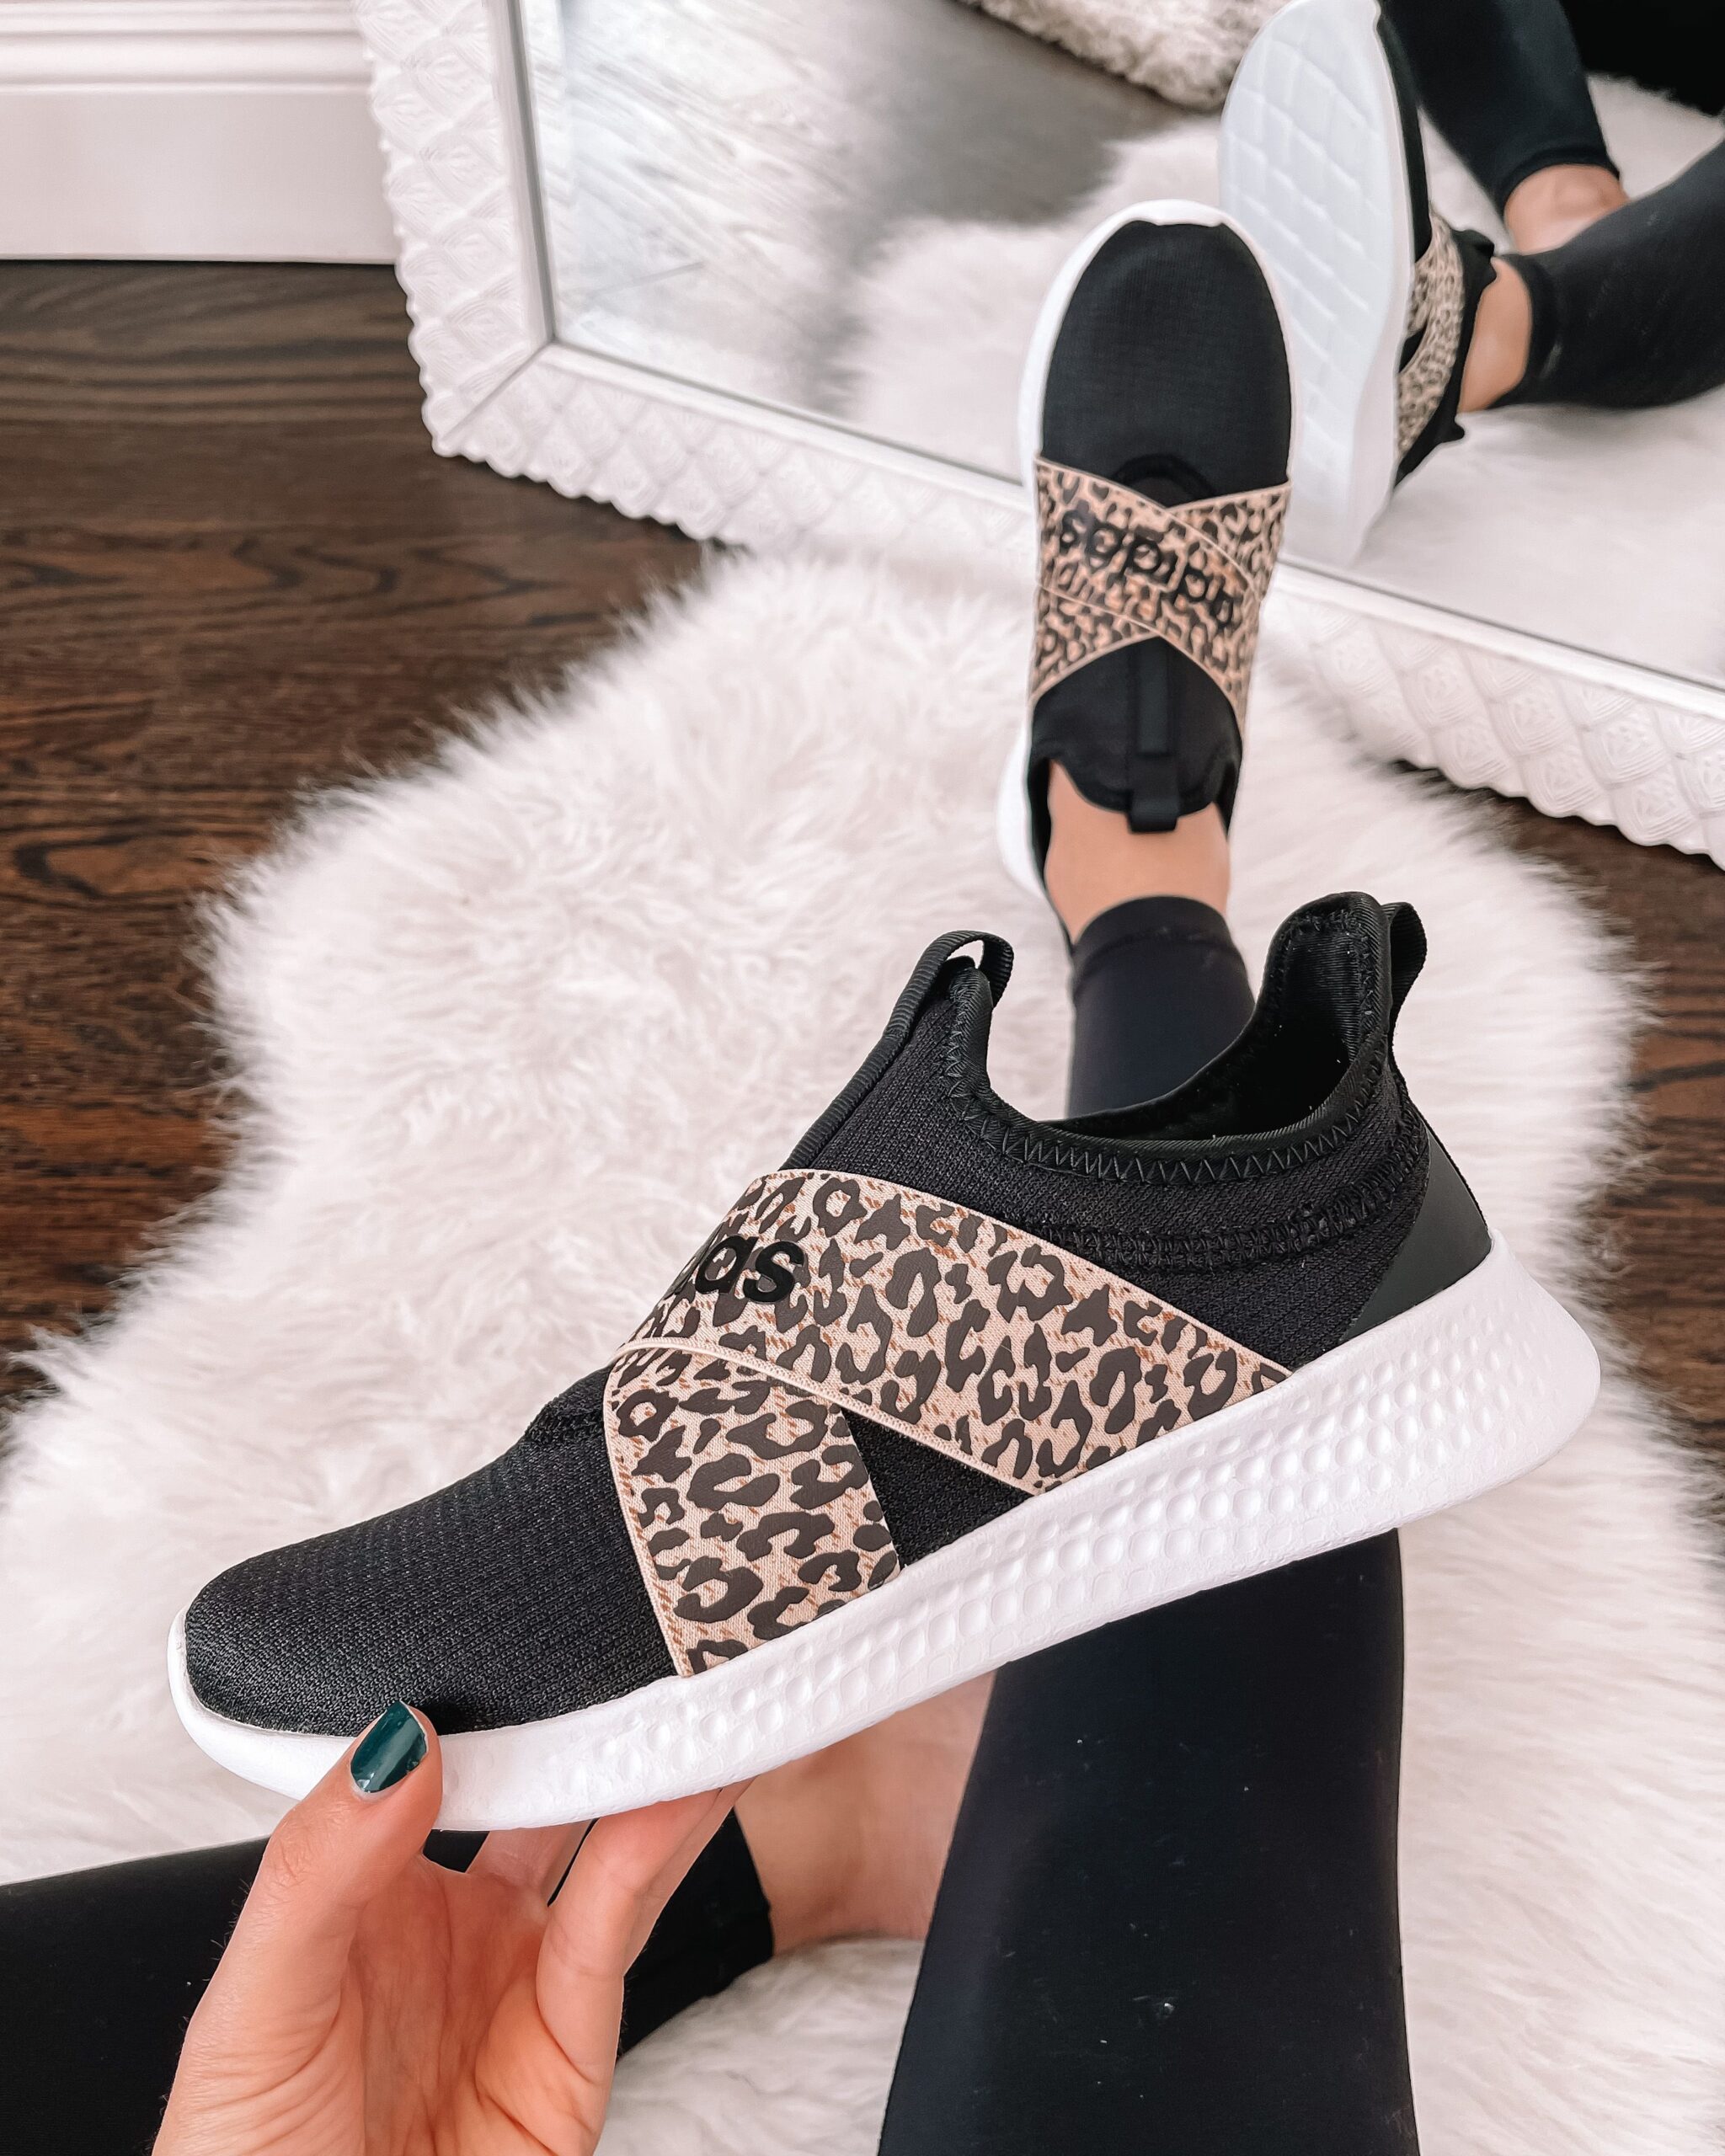 Leopard sneakers for the fashionable
girls